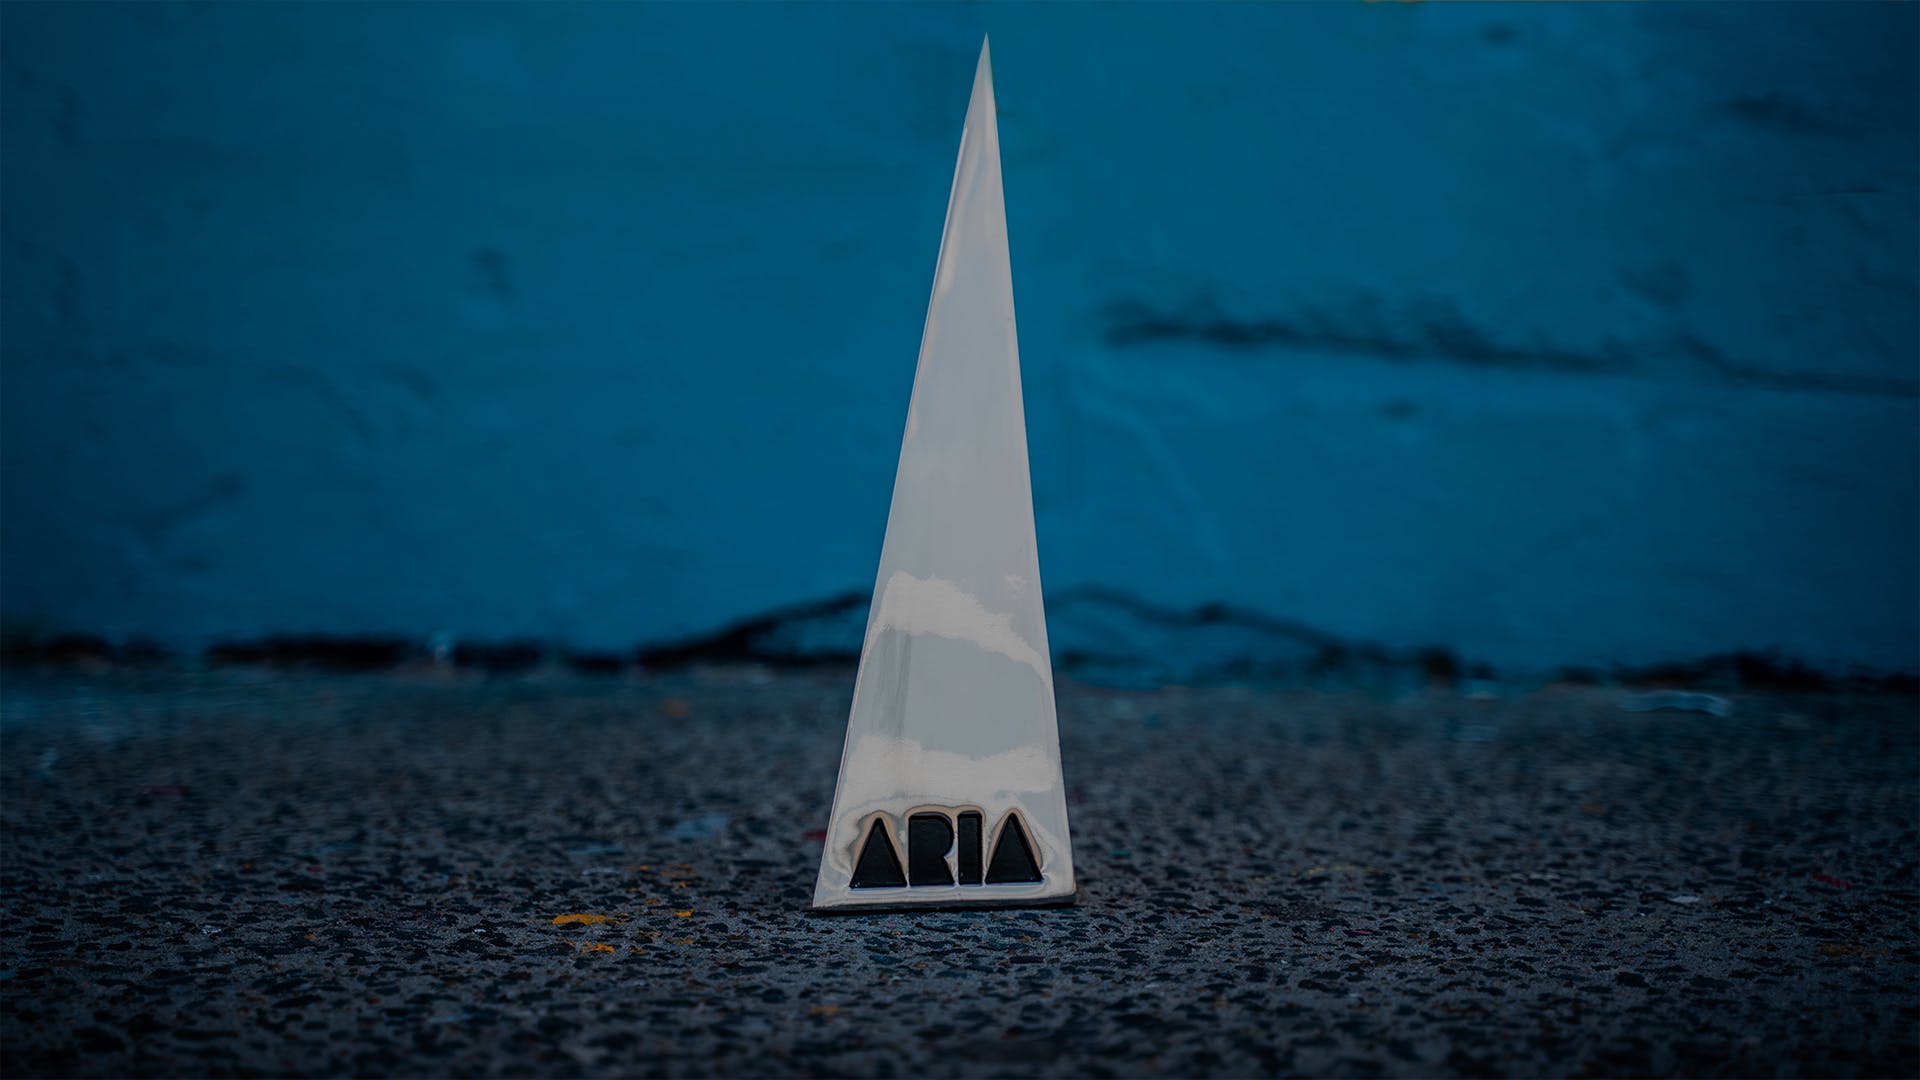 ARIA Awards Member Voting Is Set to Open, With Several Changes